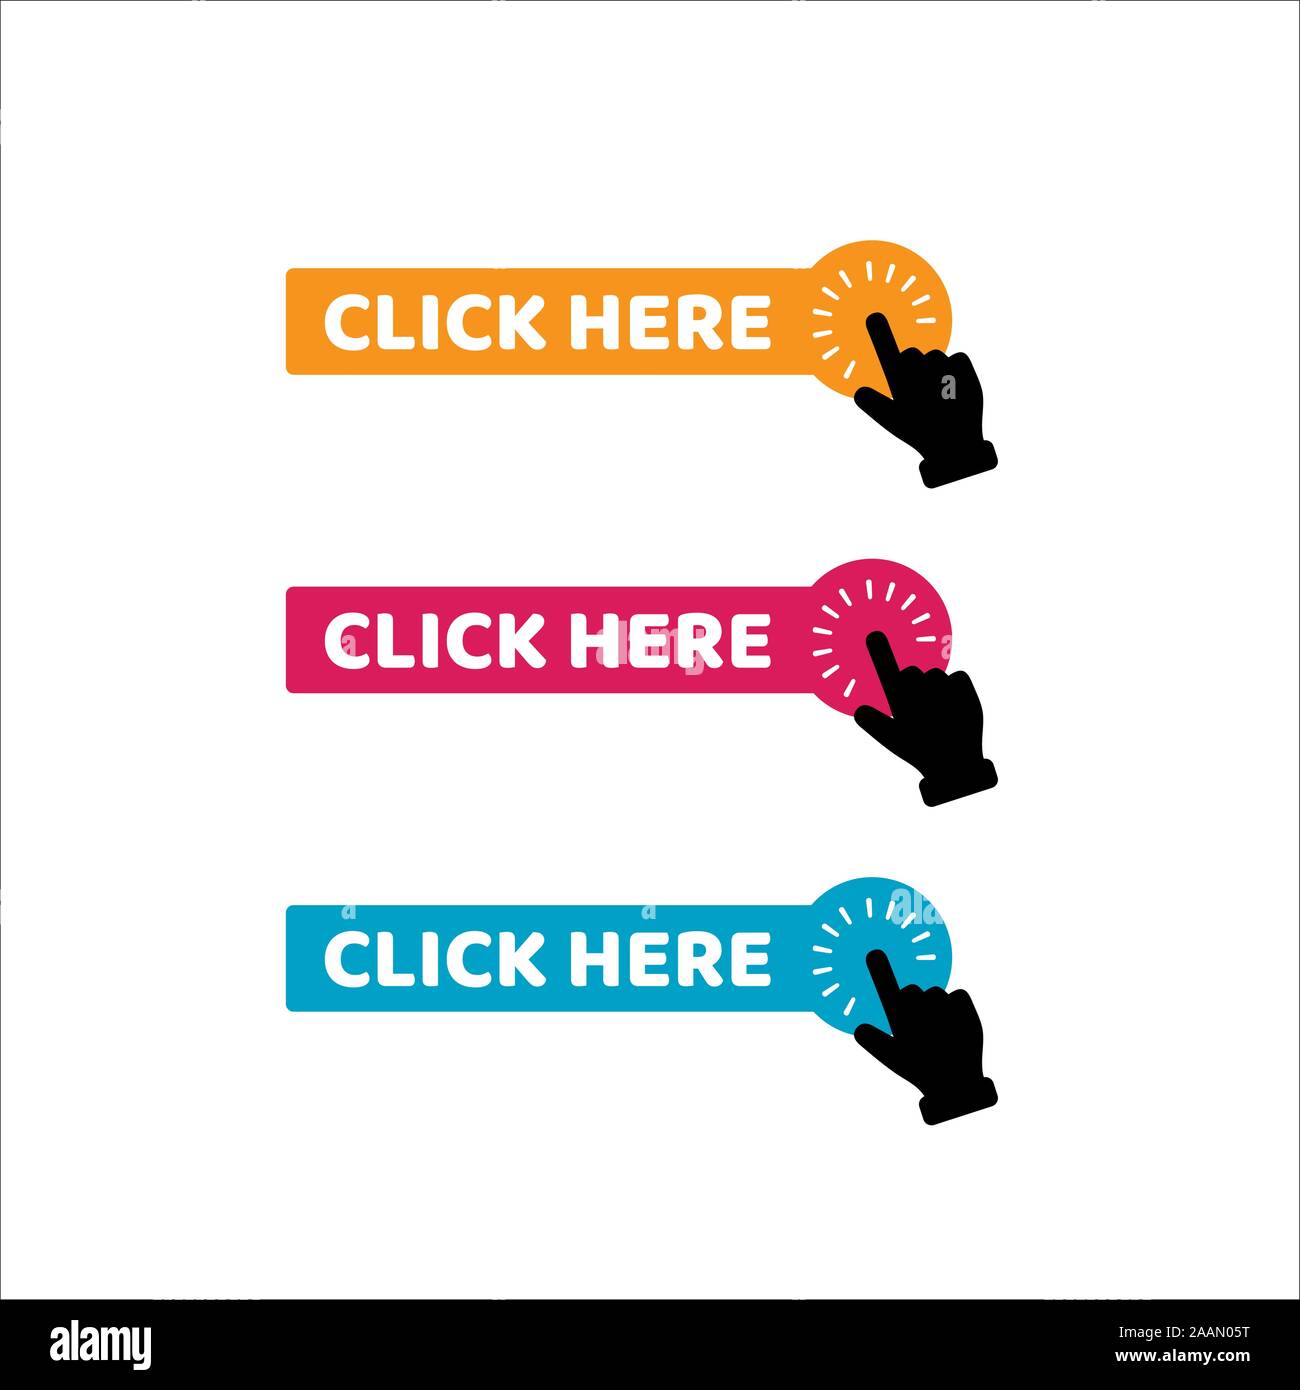 click here button vector. symbol of hand pointer clicking click here logo icon. web banner page site content element graphic design Stock Vector